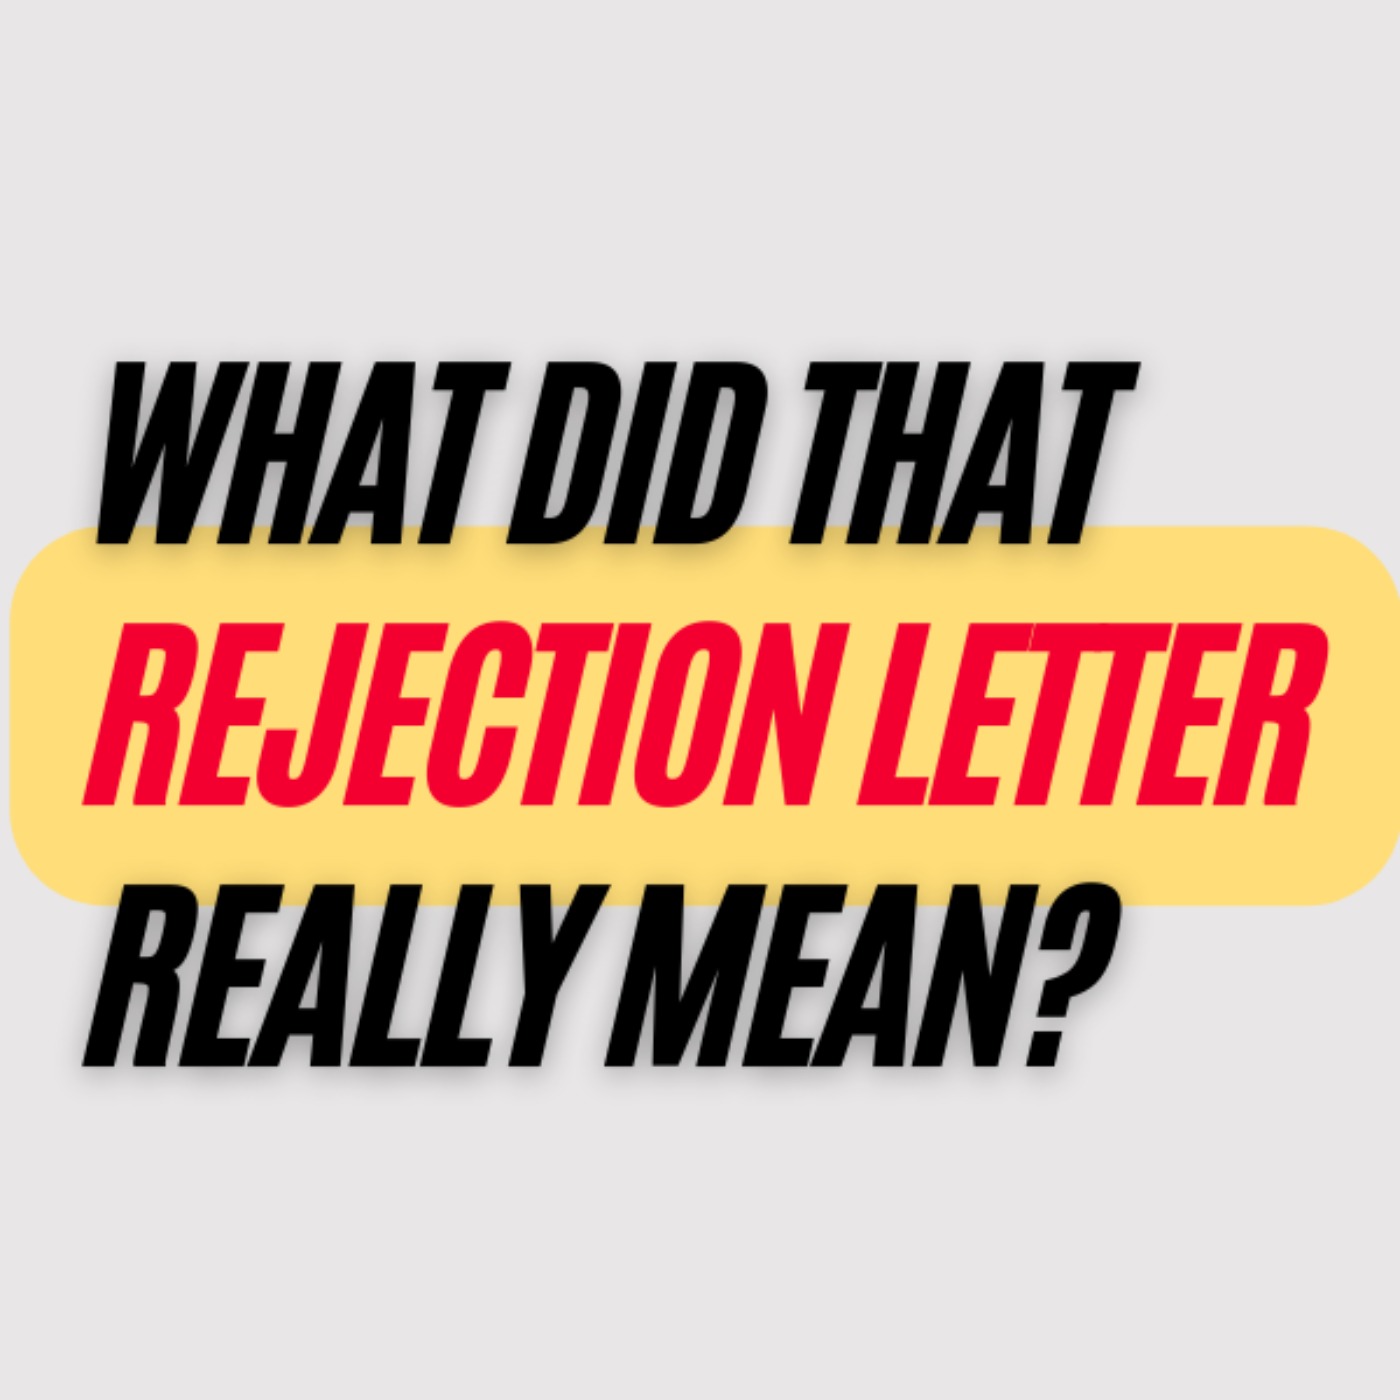 Ep. 364: What Did That Rejection Letter REALLY Mean?